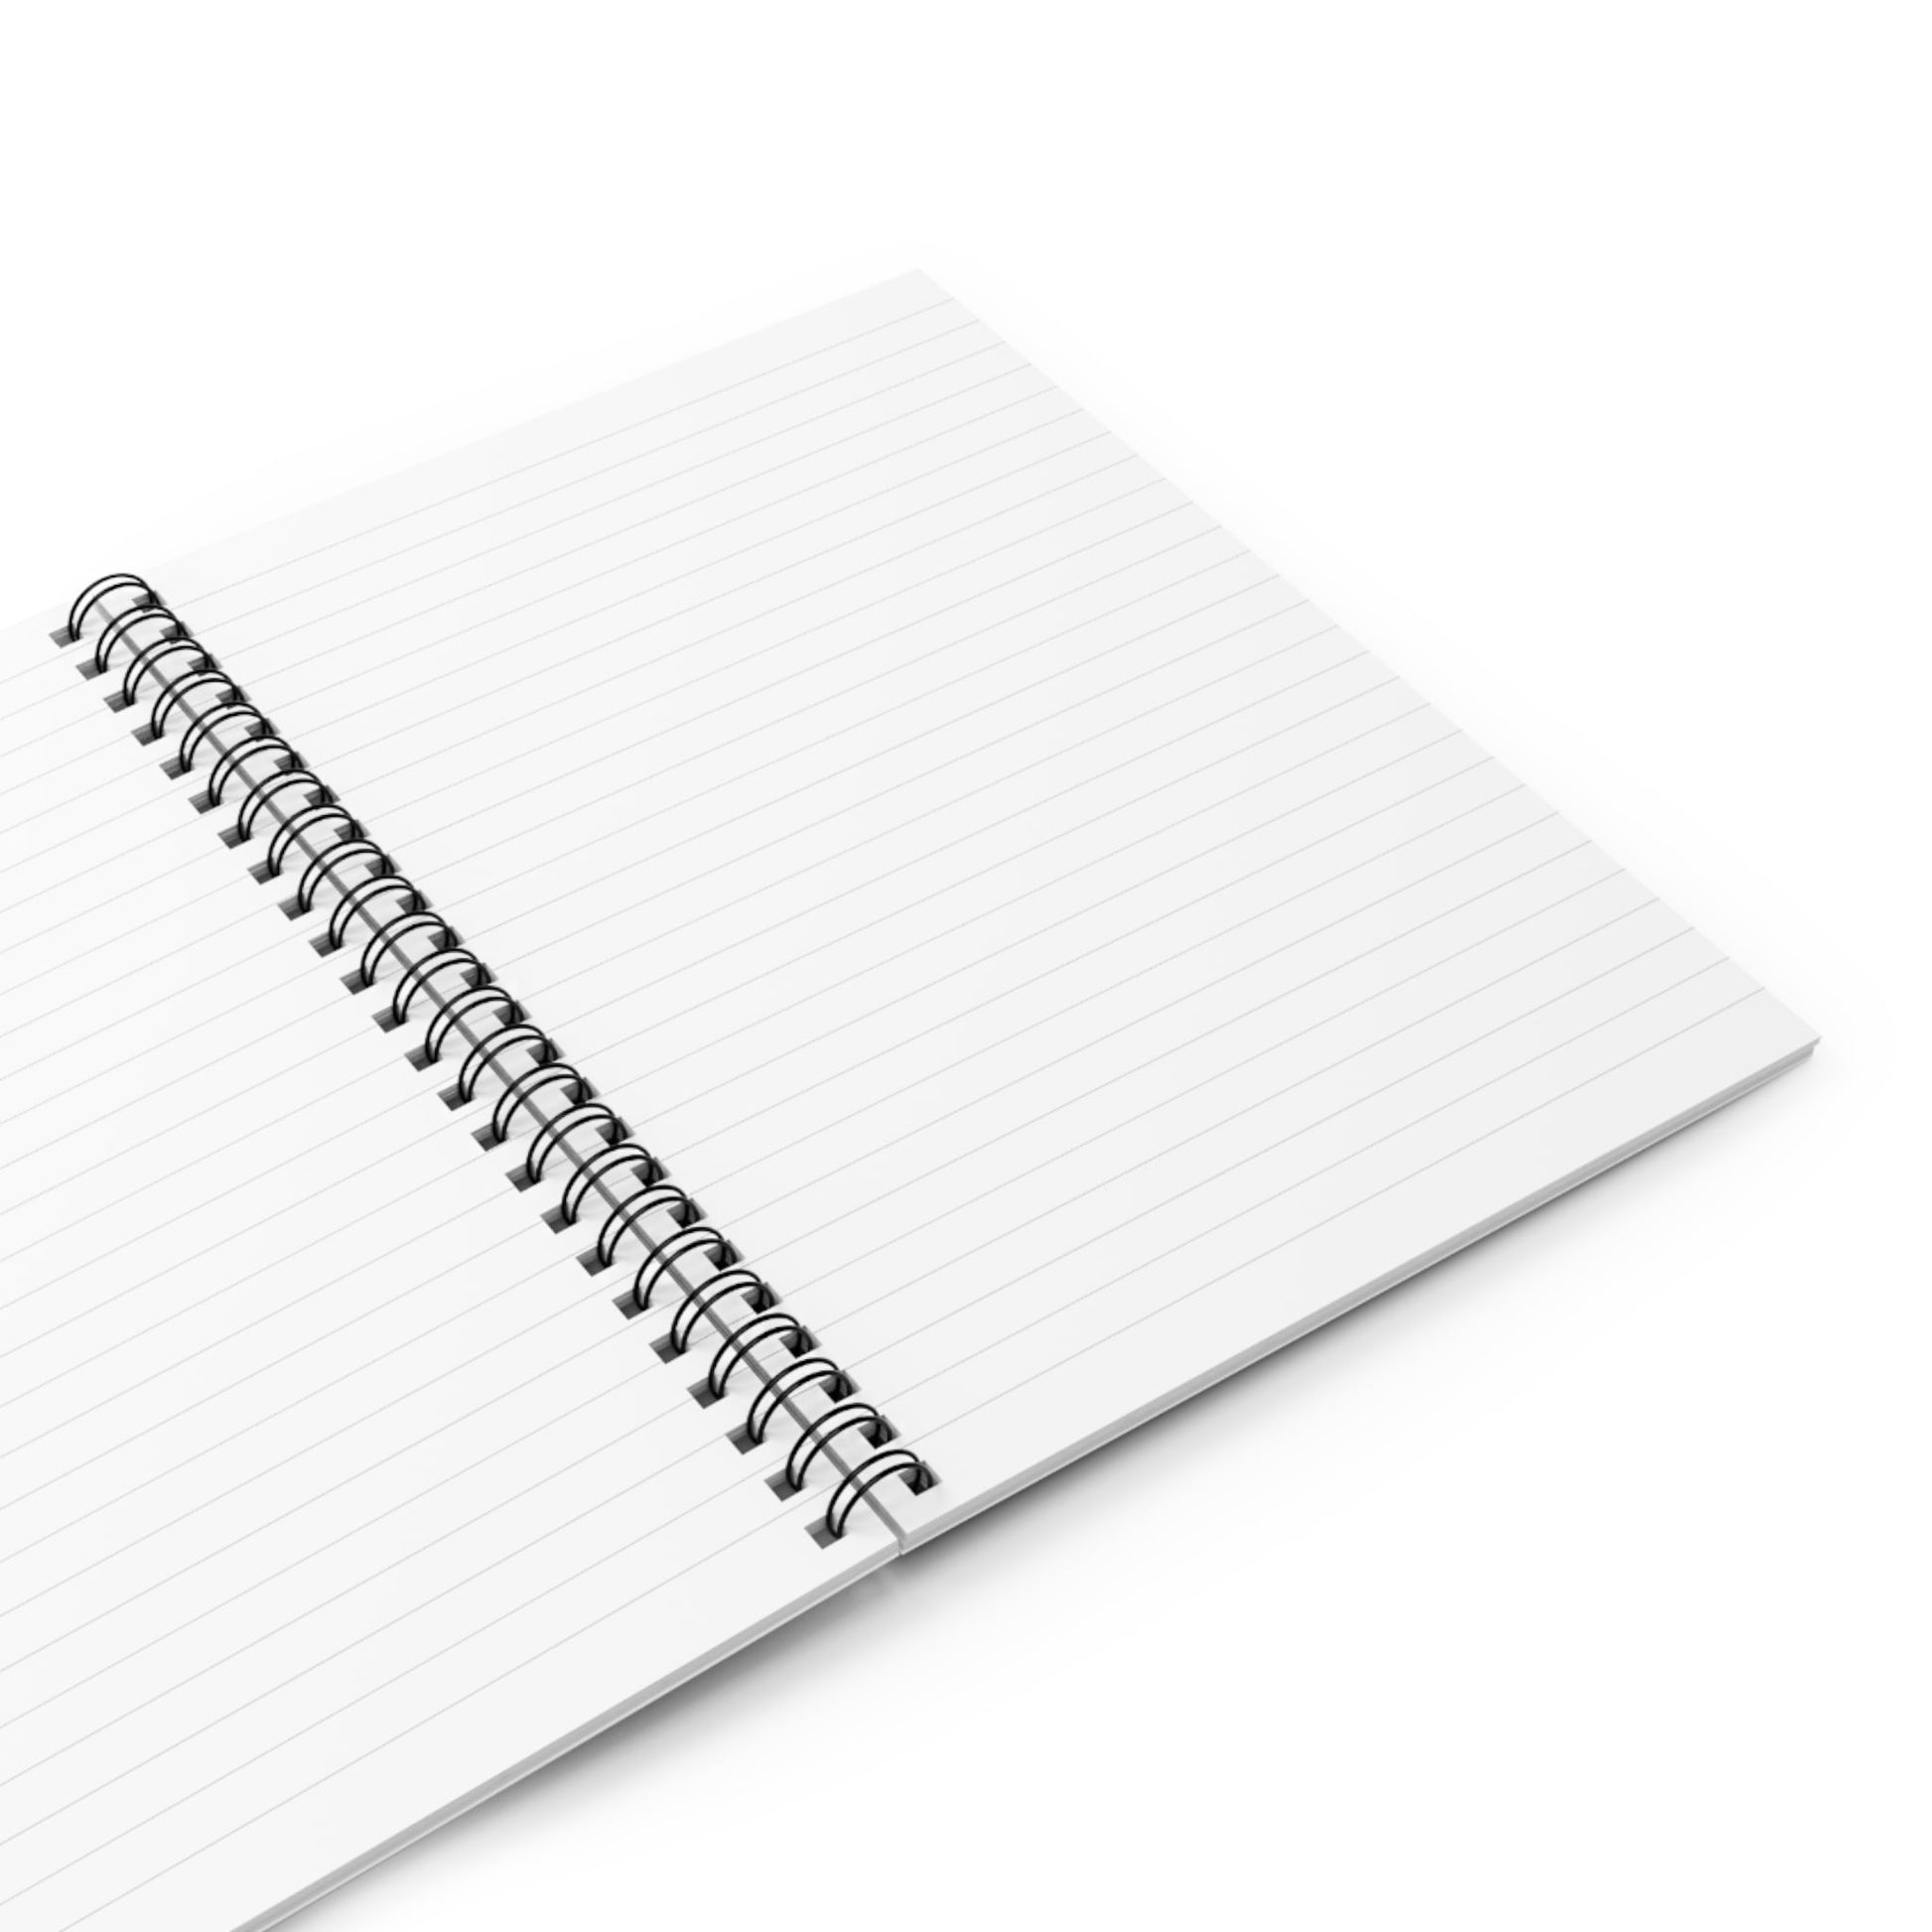 Spiral Notebook with Scientific Cover Opened with Blank White College Ruled Pages